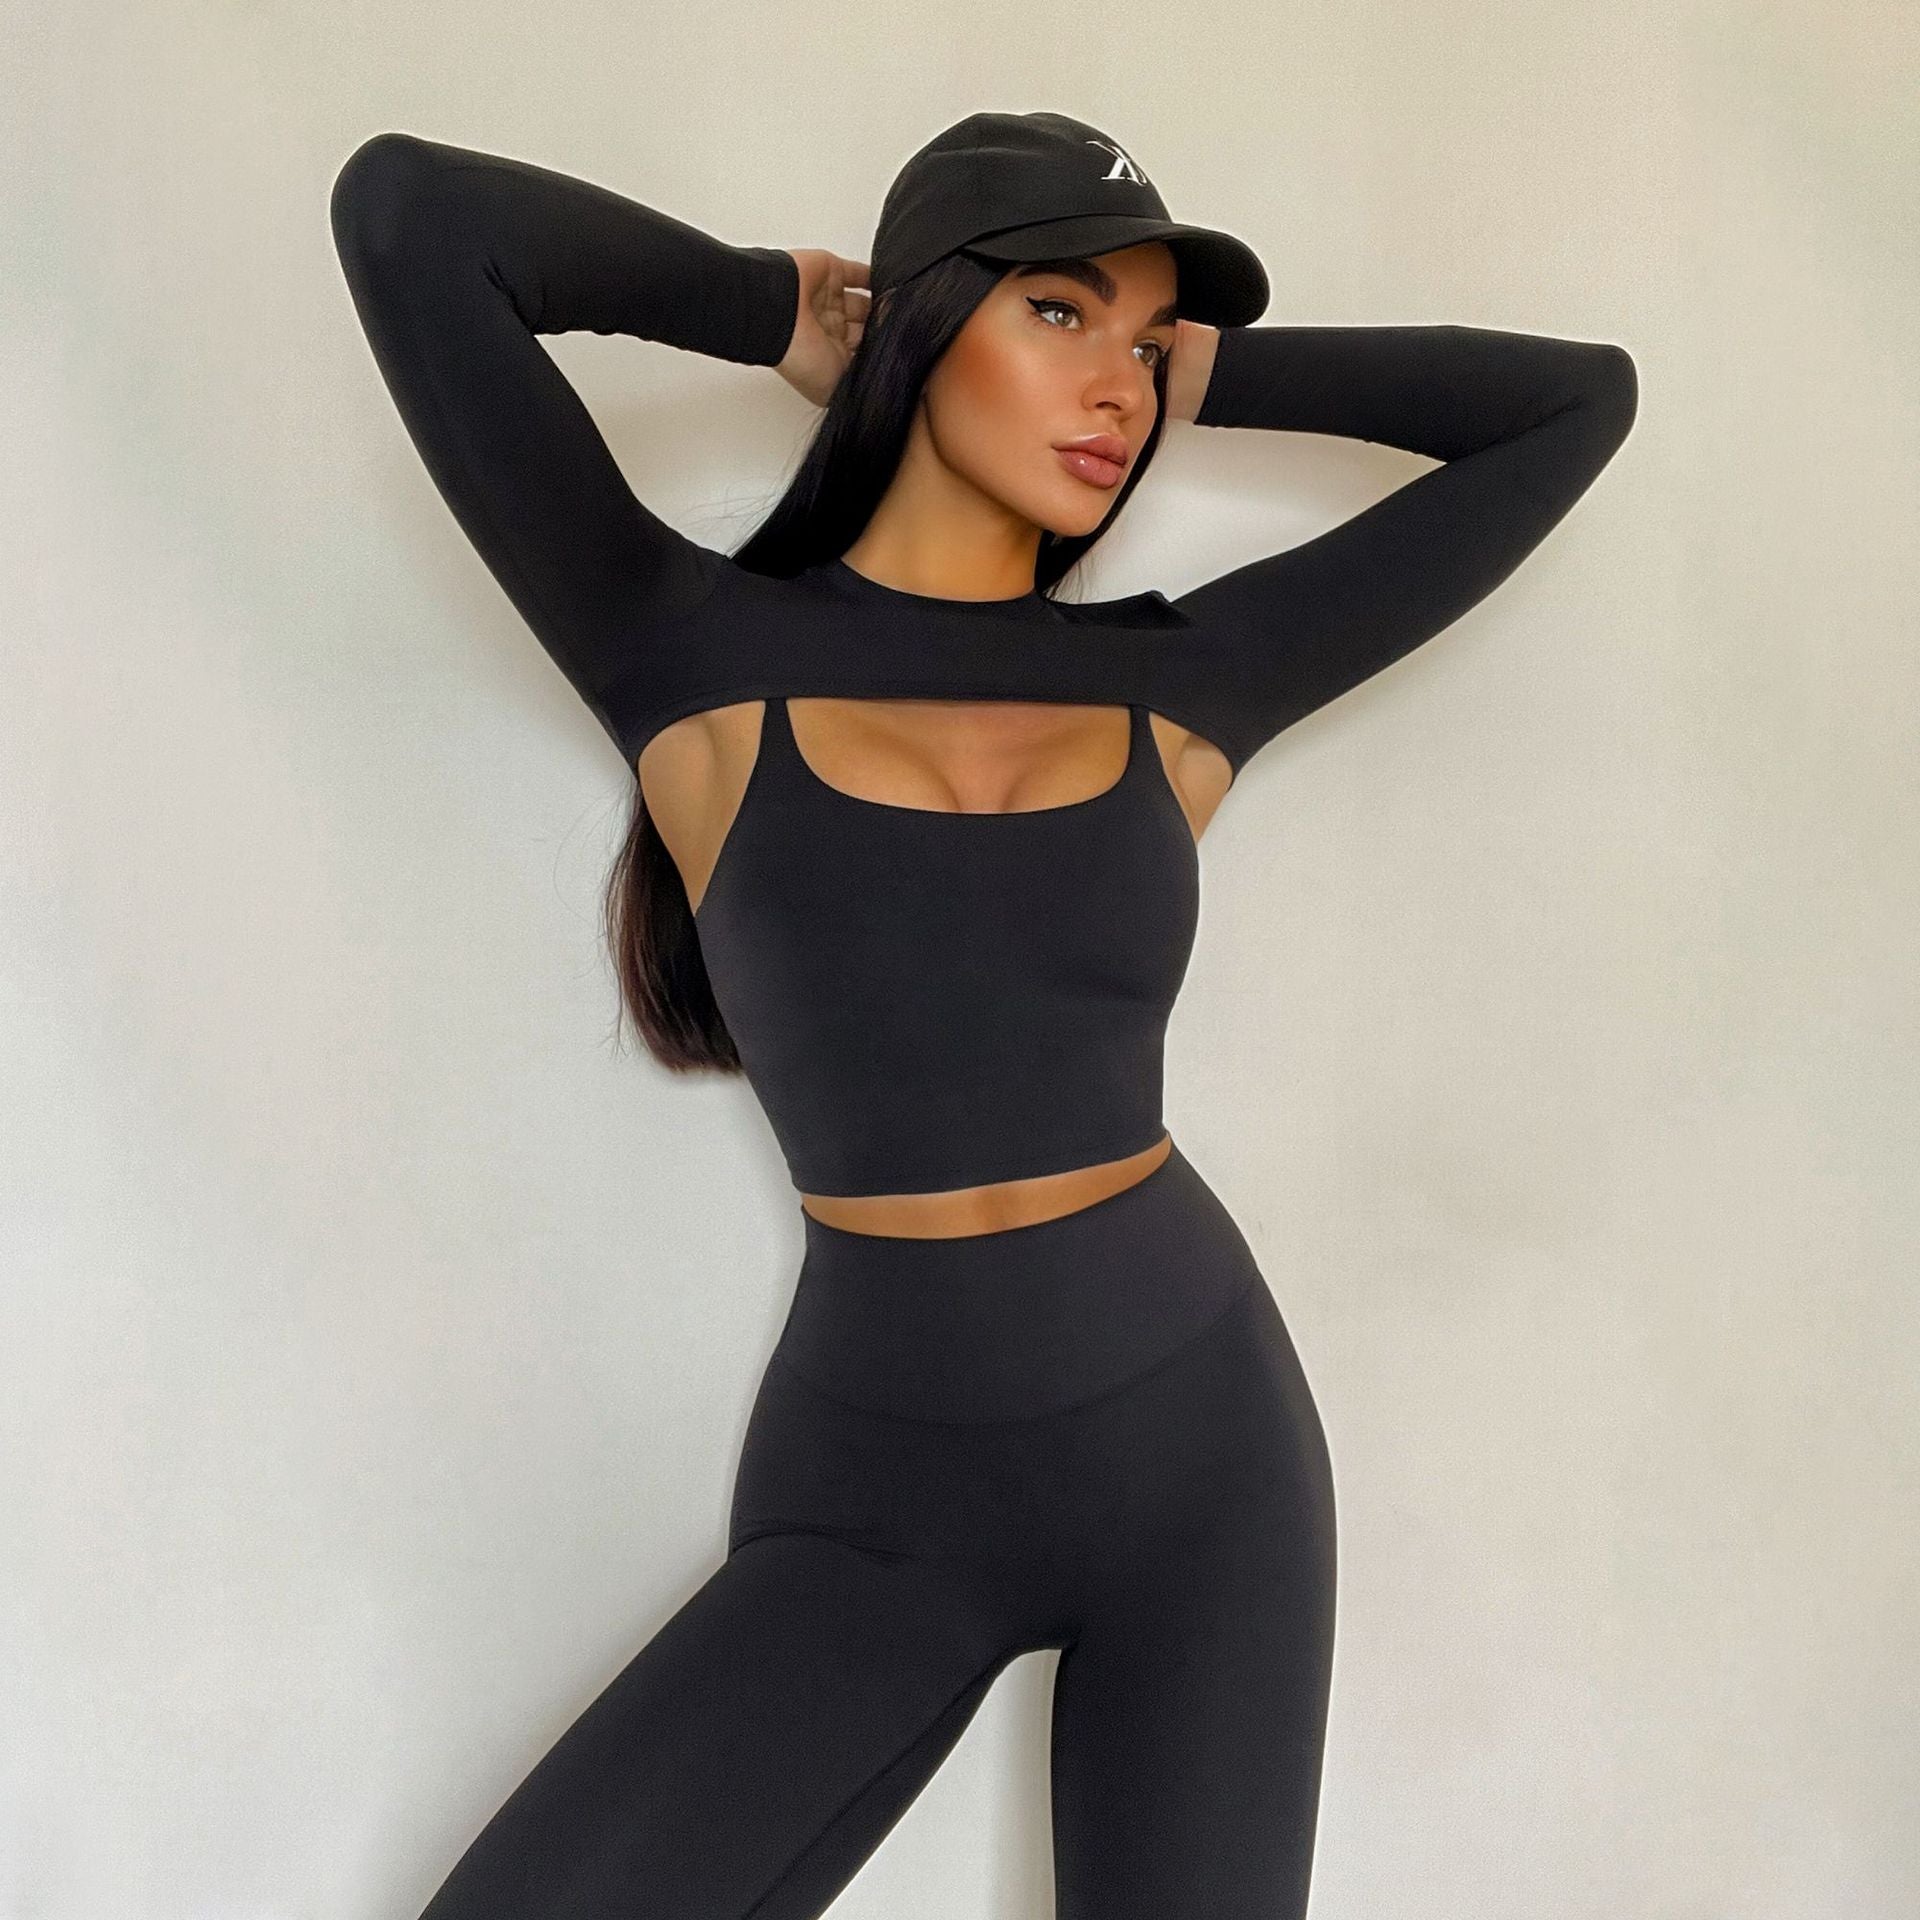 Yoga Women Workout Clothes Sling Beautiful Back Sports Underwear Long Sleeve T Shirt Trousers Workout Clothes Suit